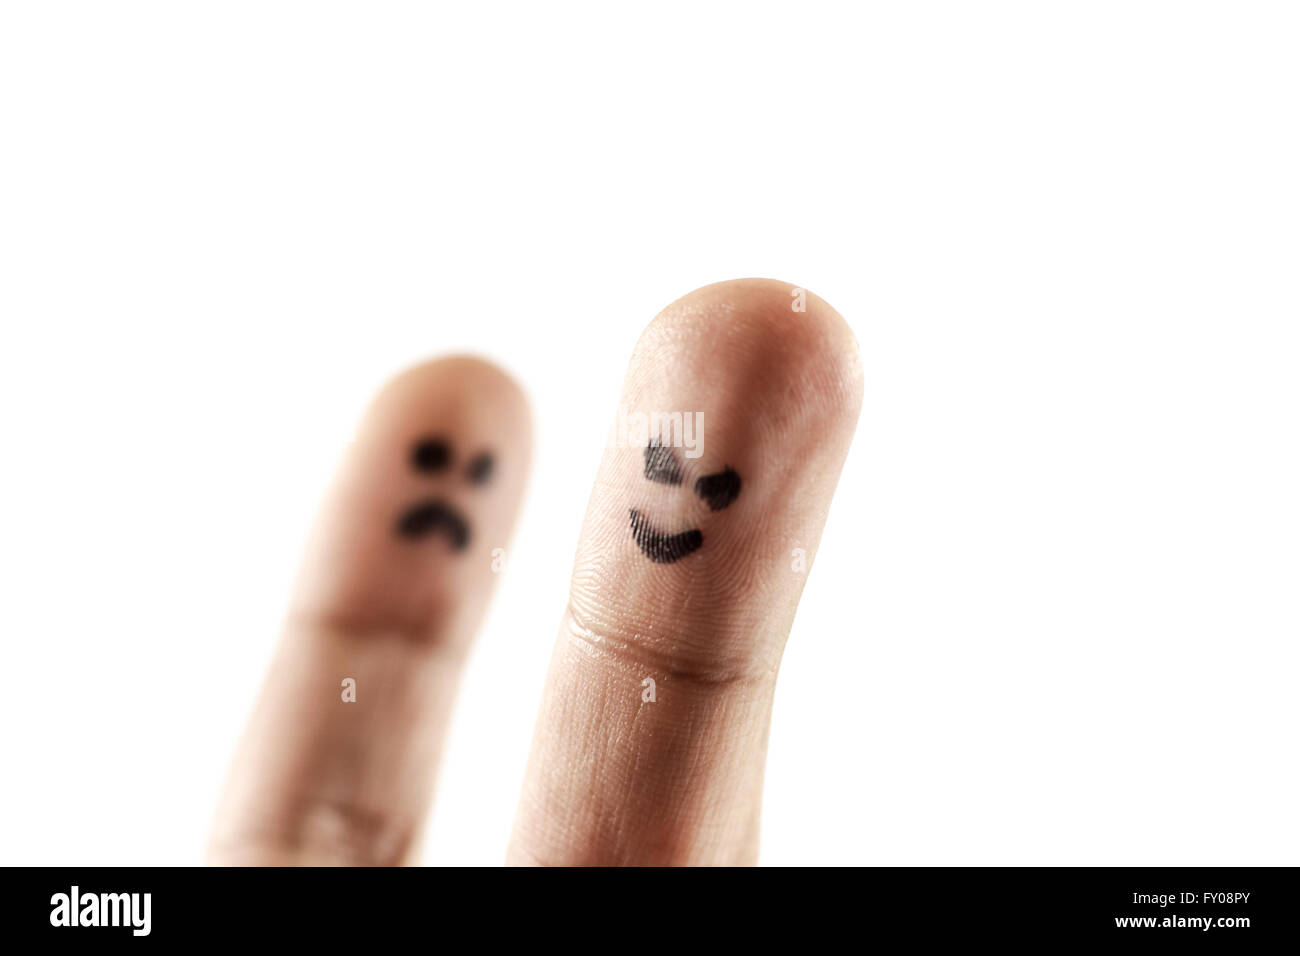 White background with two fingers representing sadness and happiness Stock Photo